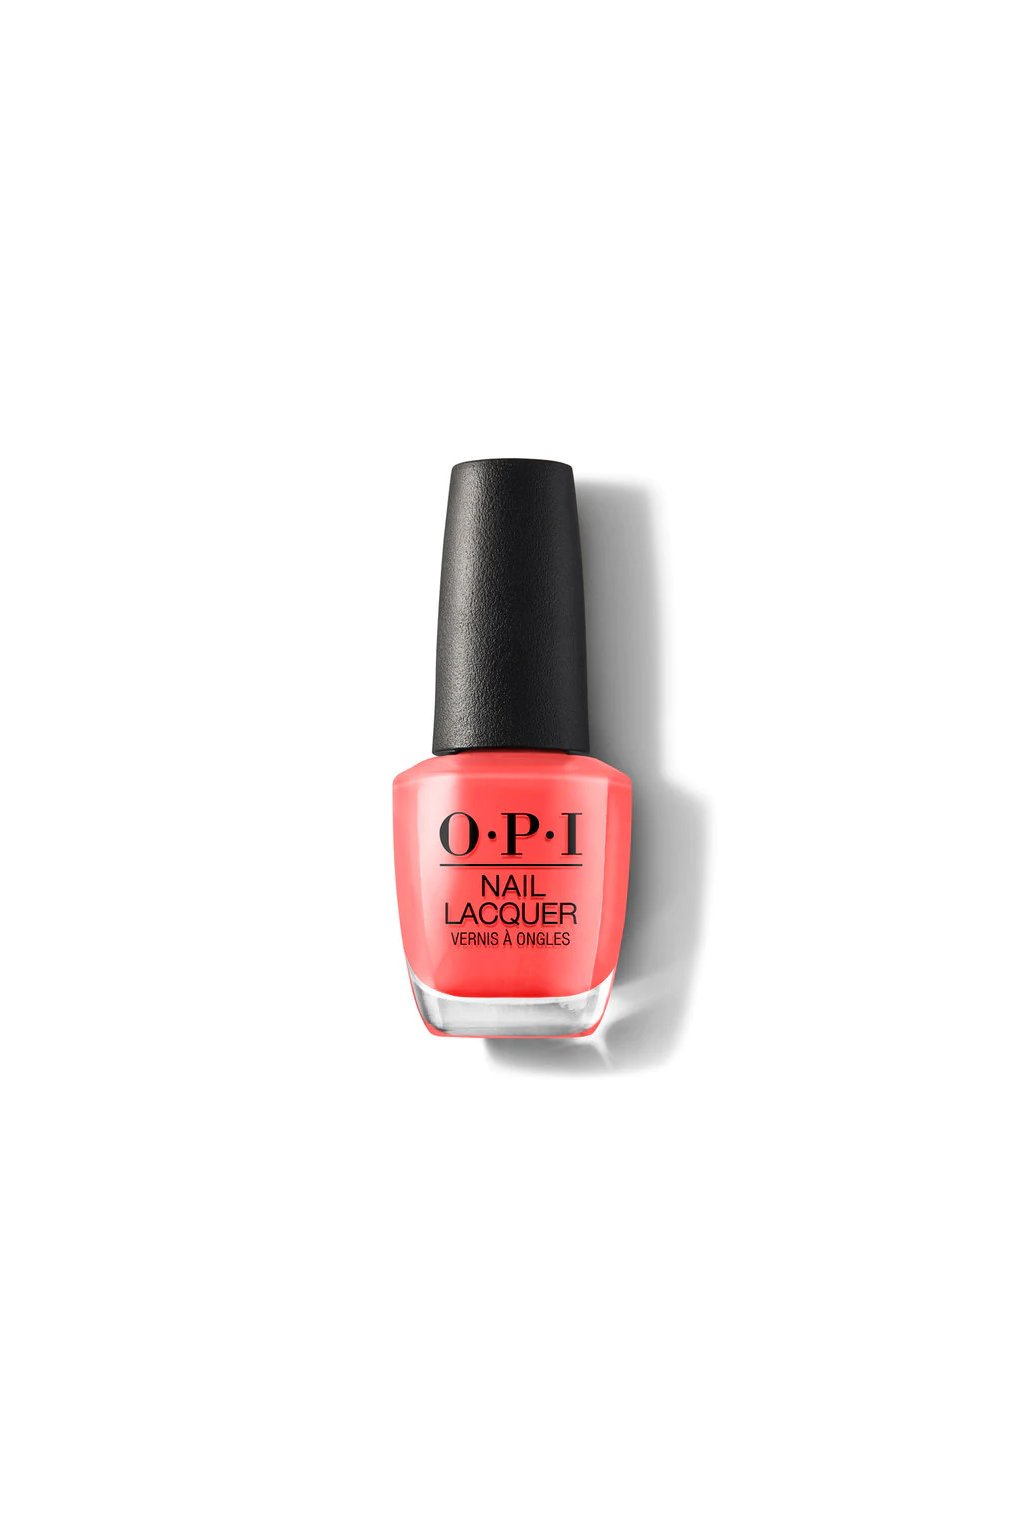 1. OPI Nail Lacquer in "Hot & Spicy" - wide 5